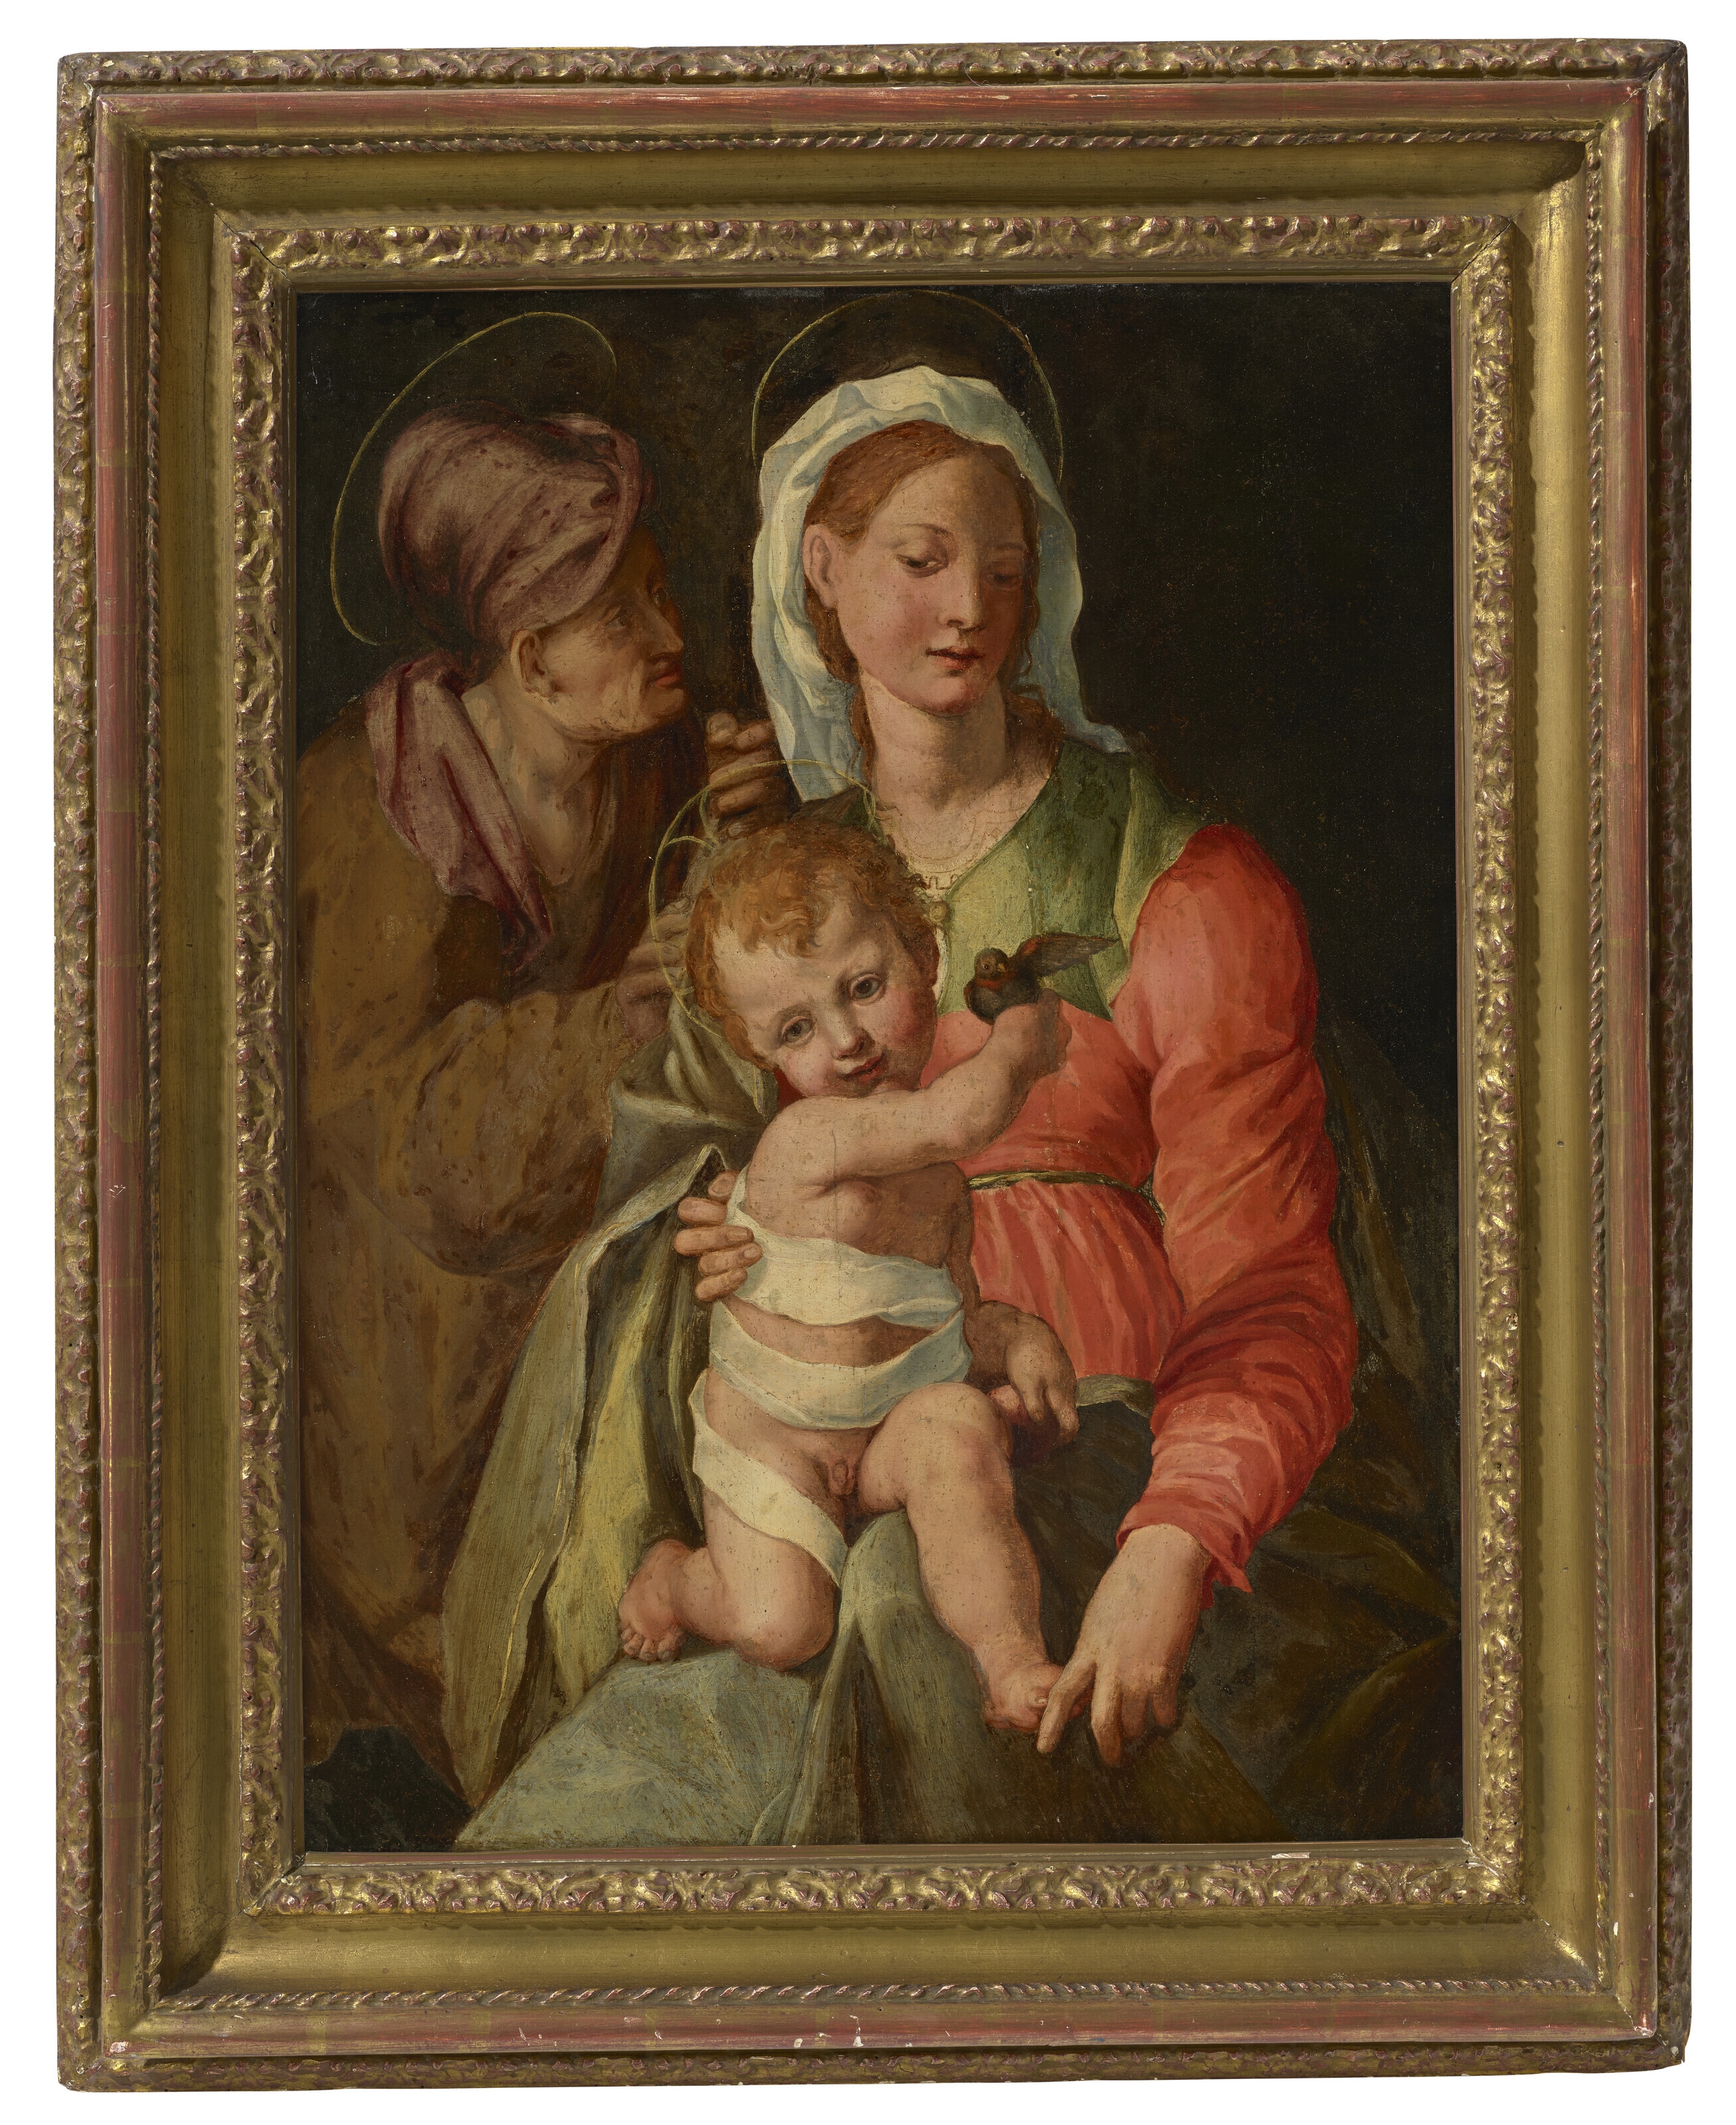 The Madonna and Child with Saint Anne - Jacopo Coppi